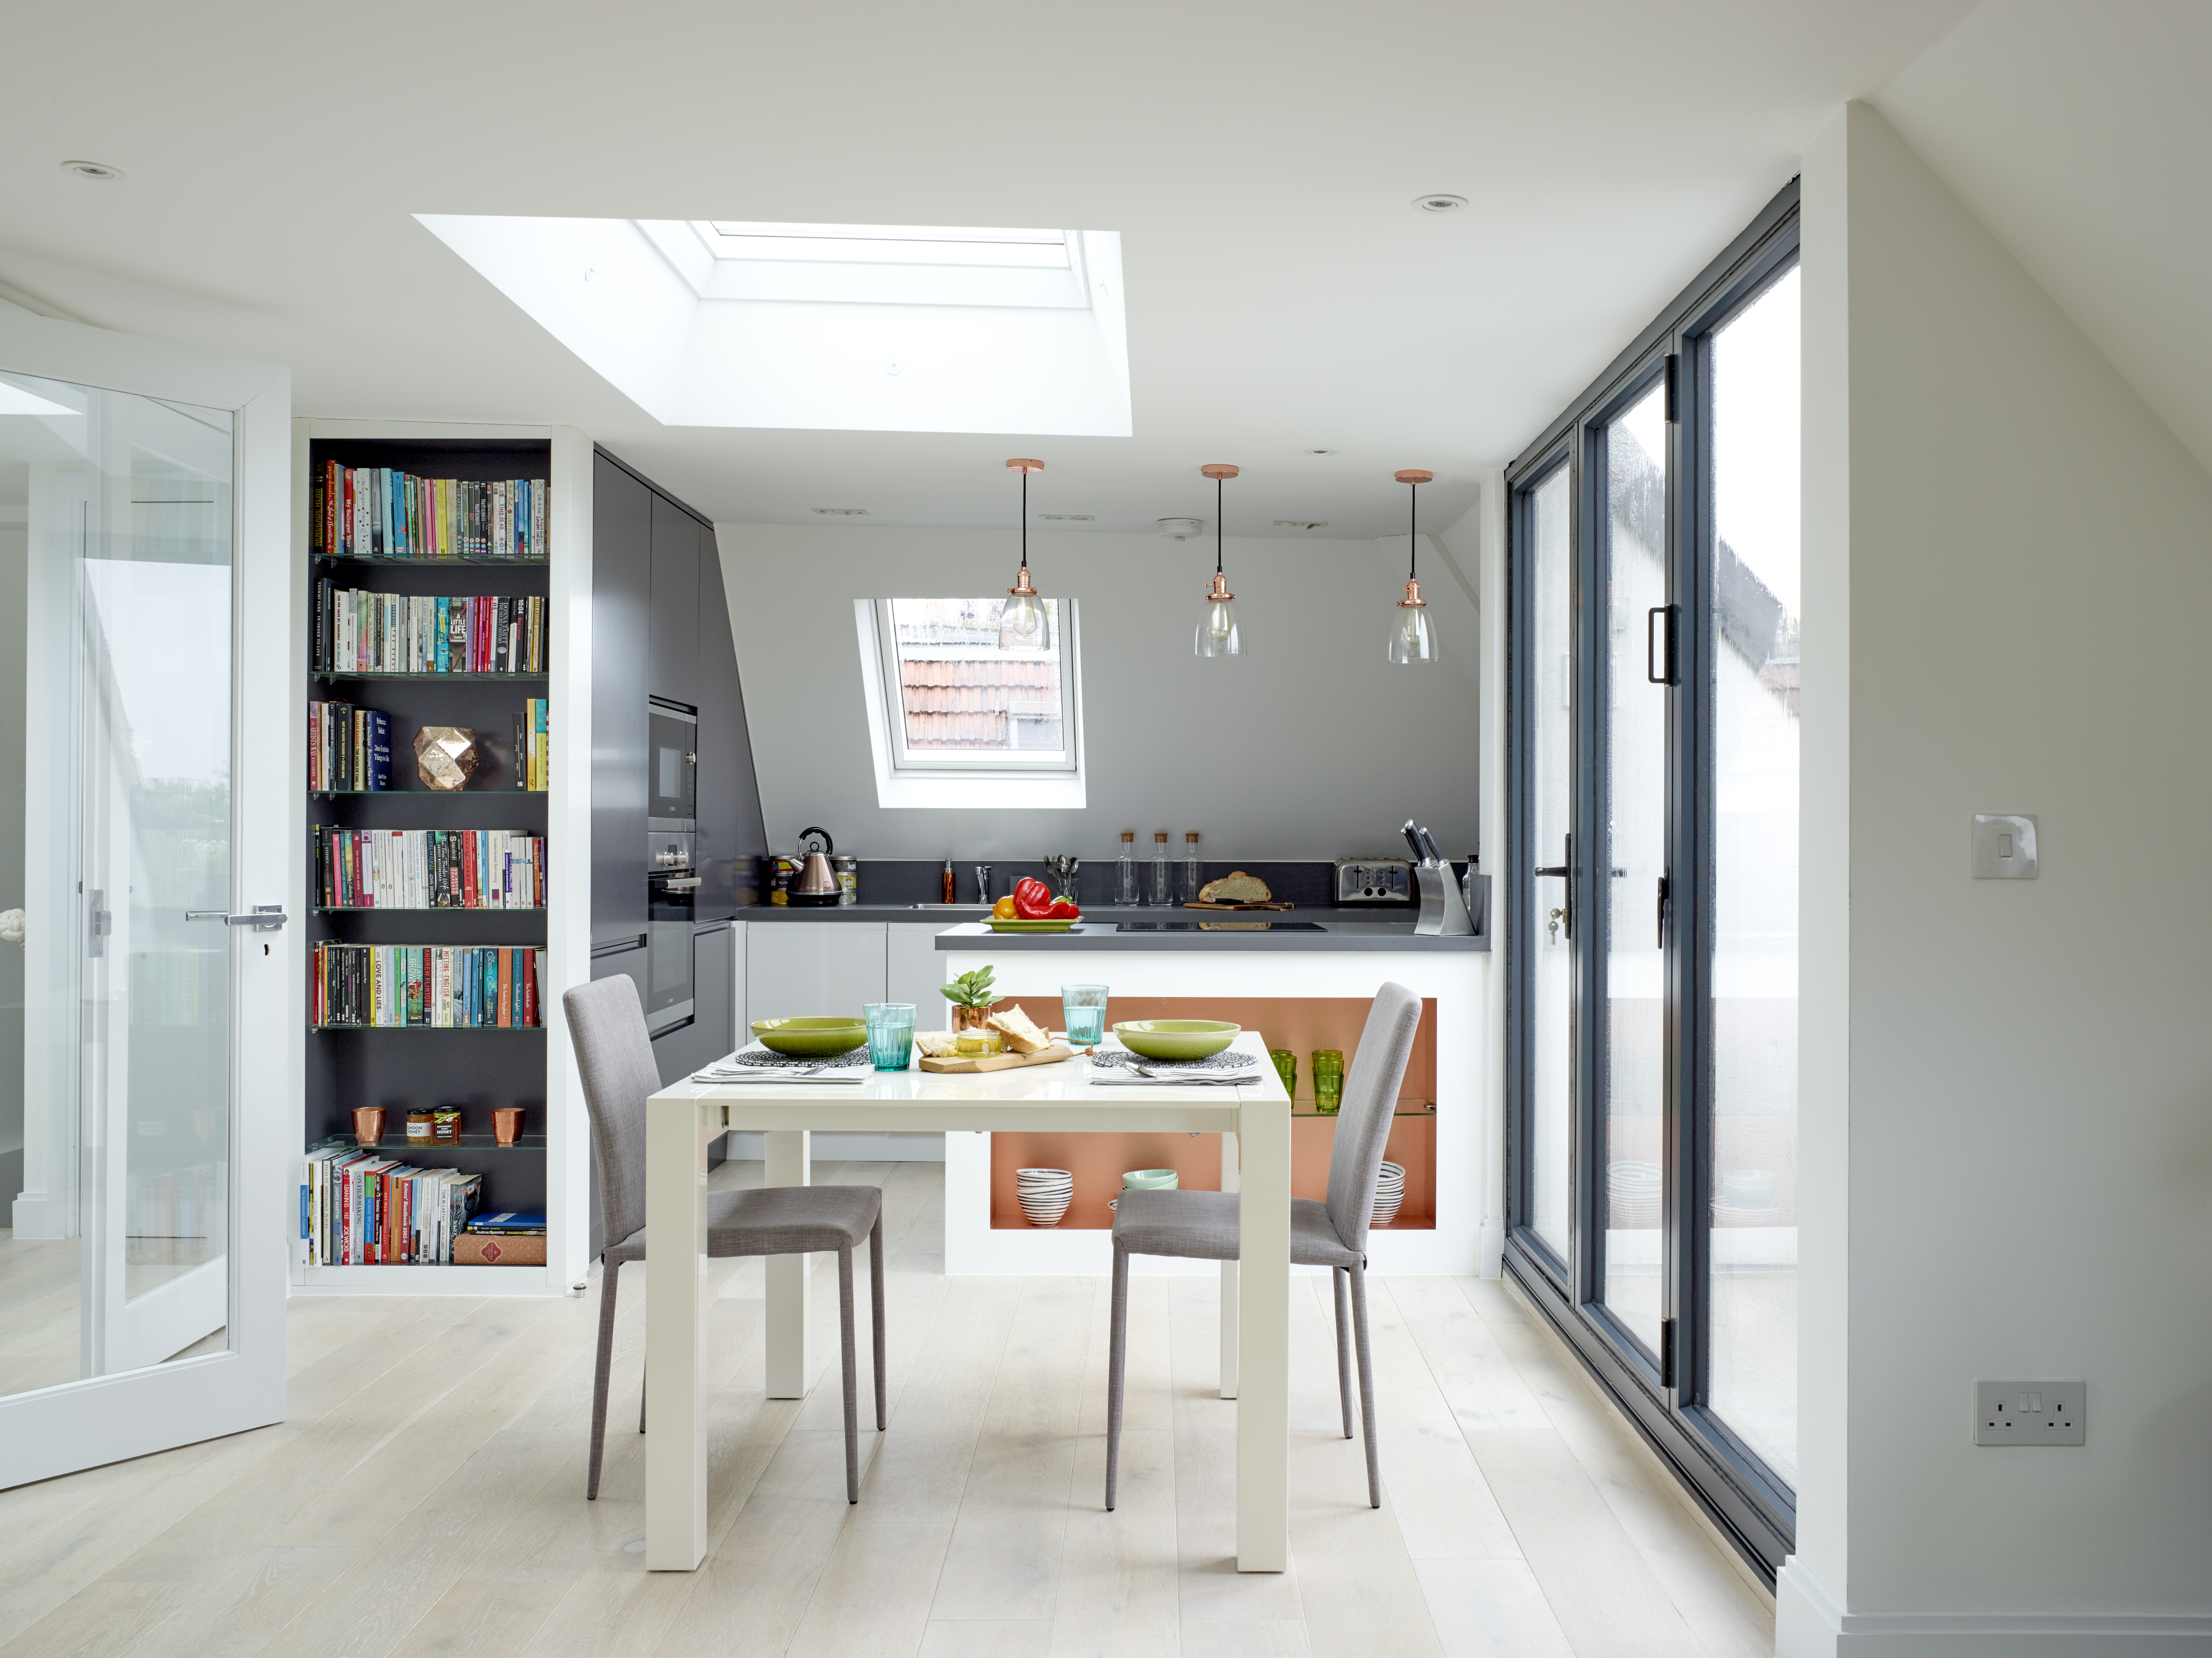 Kitchen and dining in a loft conversion, West Hampstead